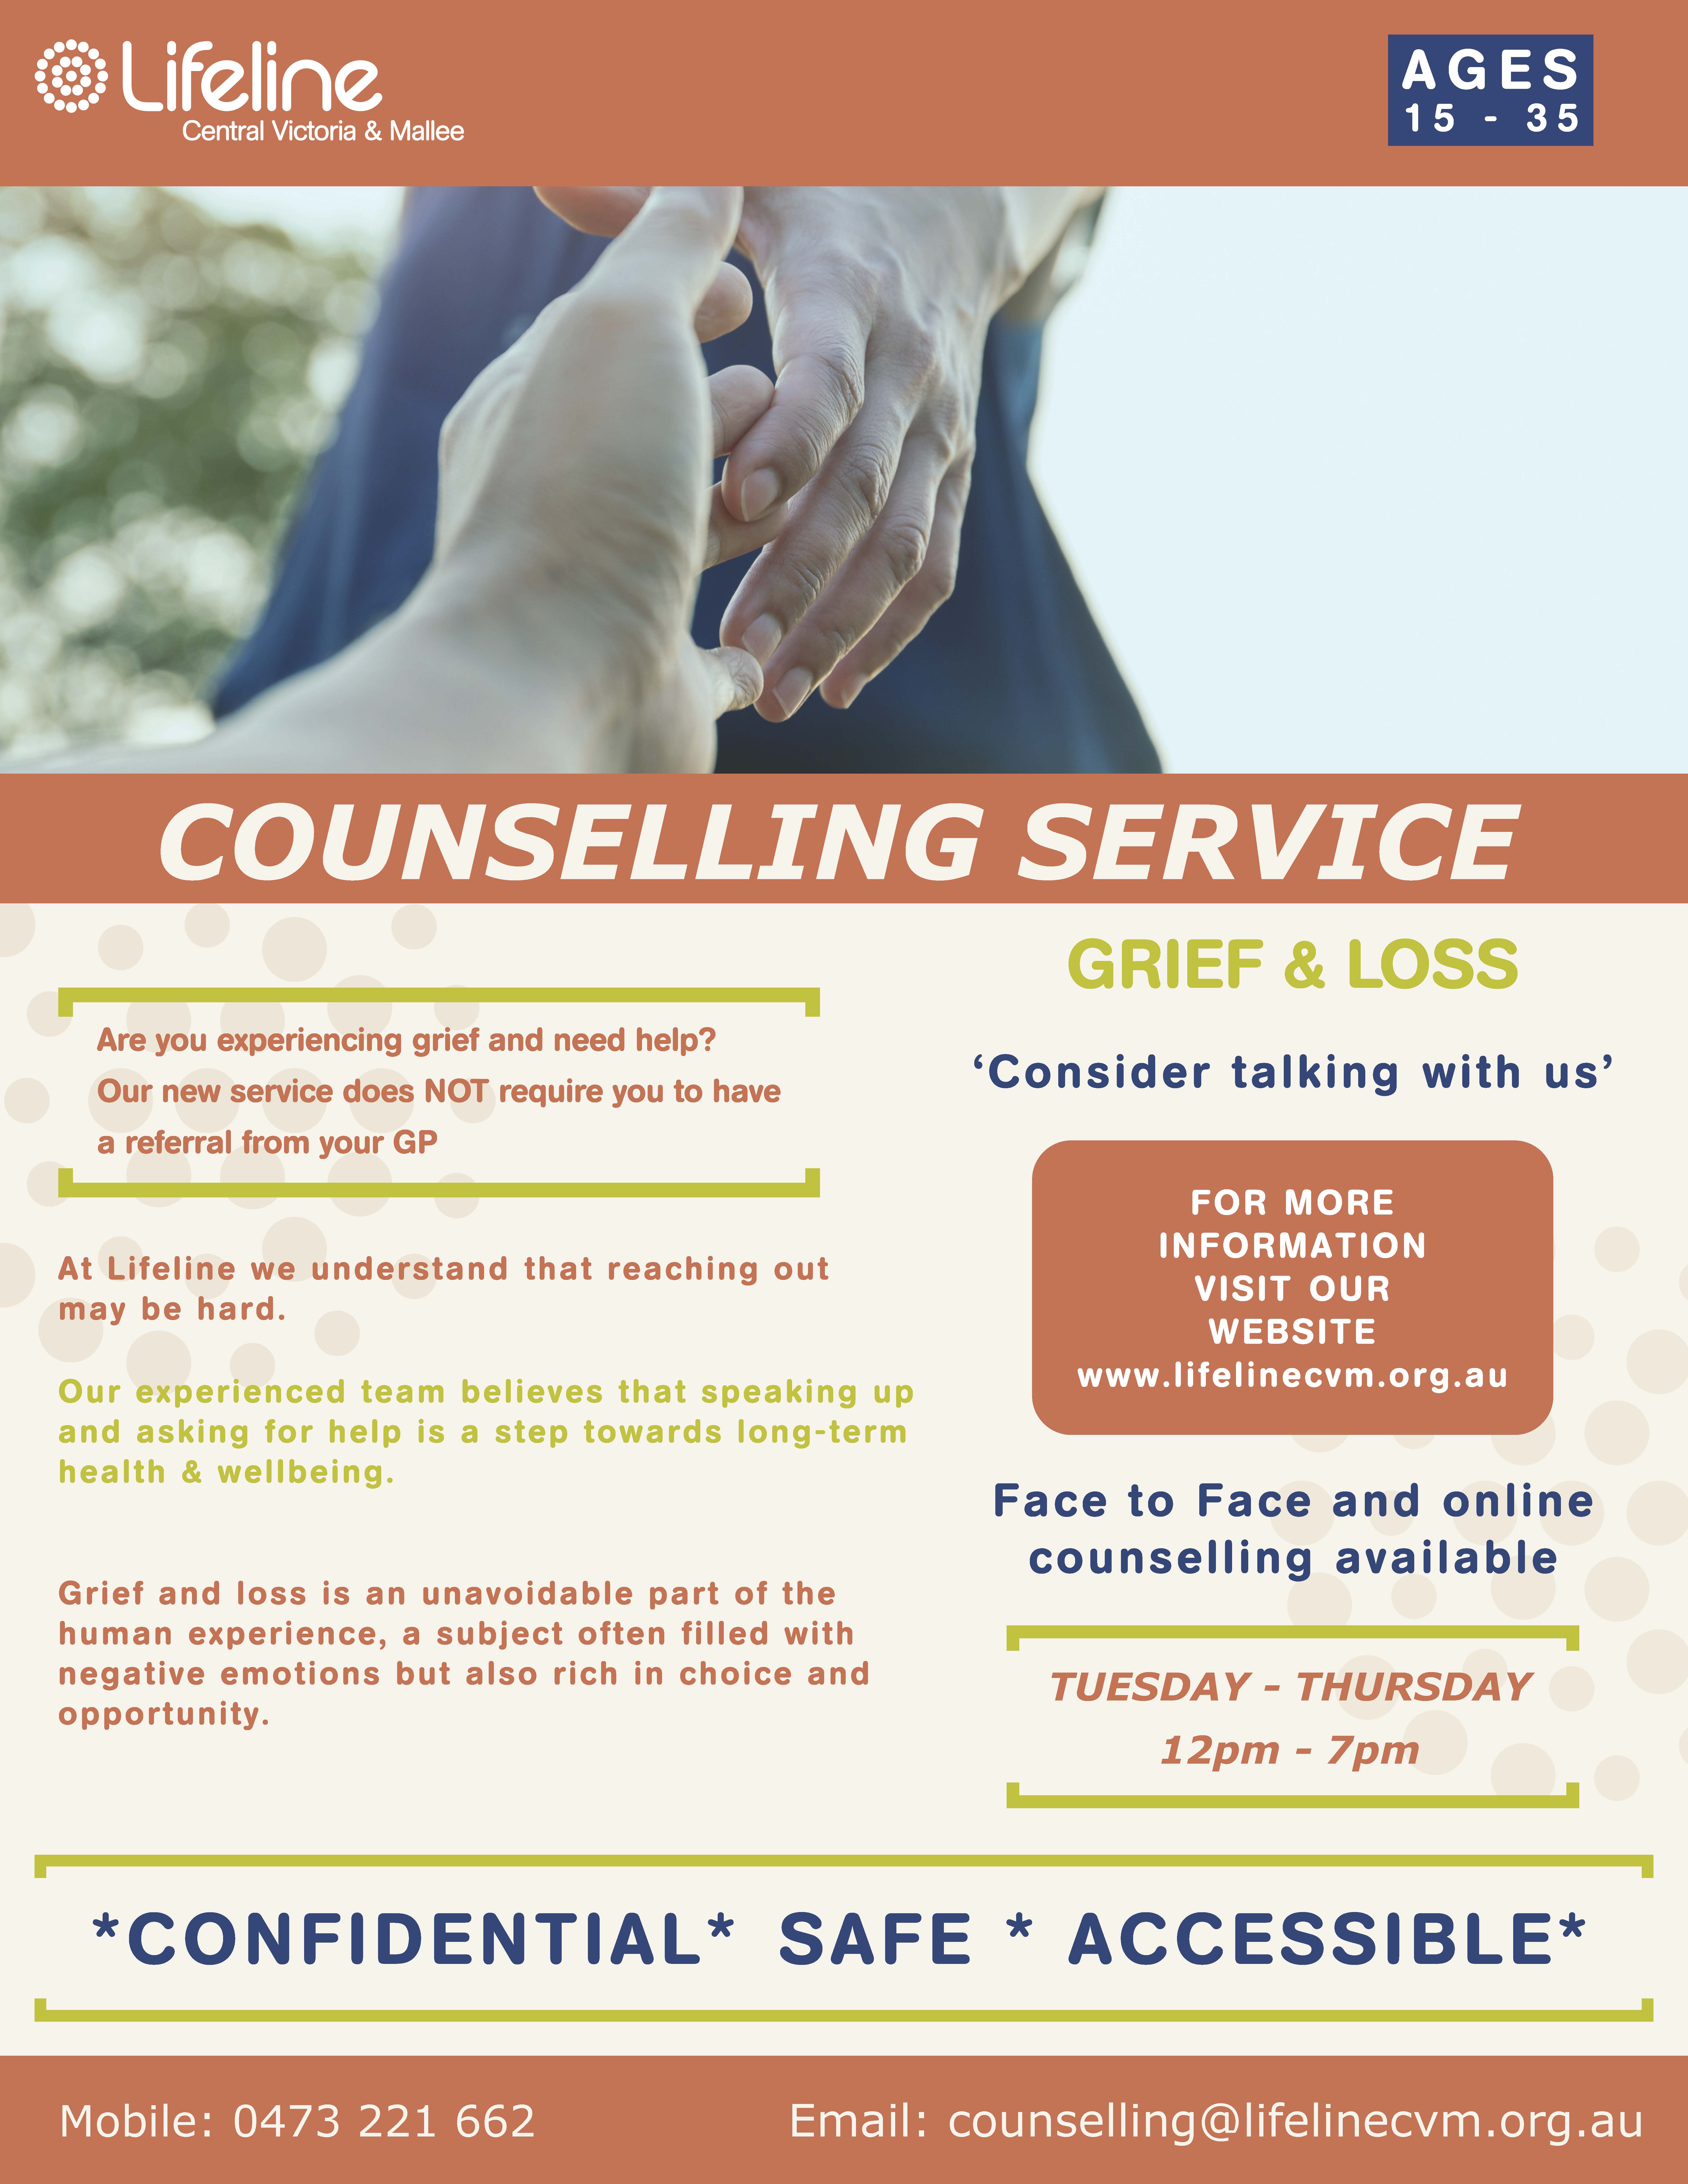 DOC Lifeline Counselling Service A4 Flyer 20220509